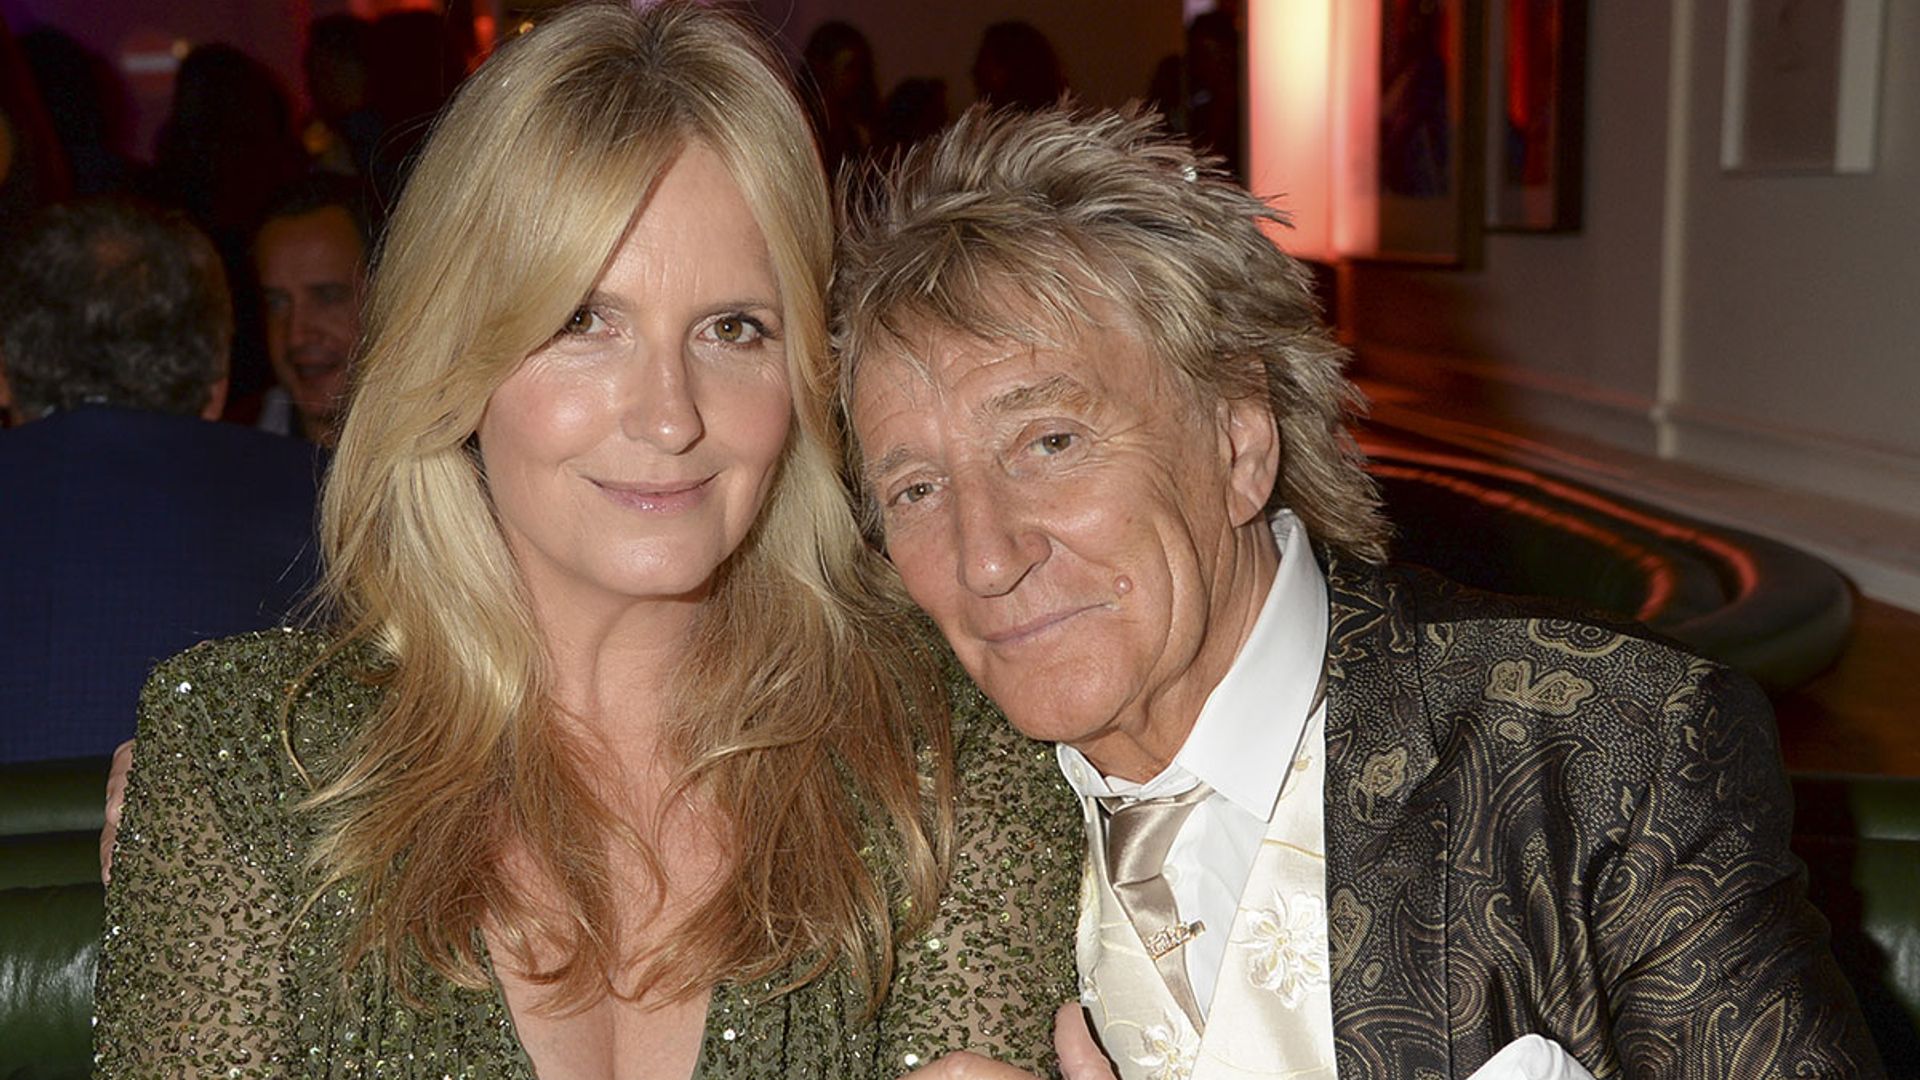 Penny Lancaster 'wasn’t the person I married' during menopause battle says Rod Stewart